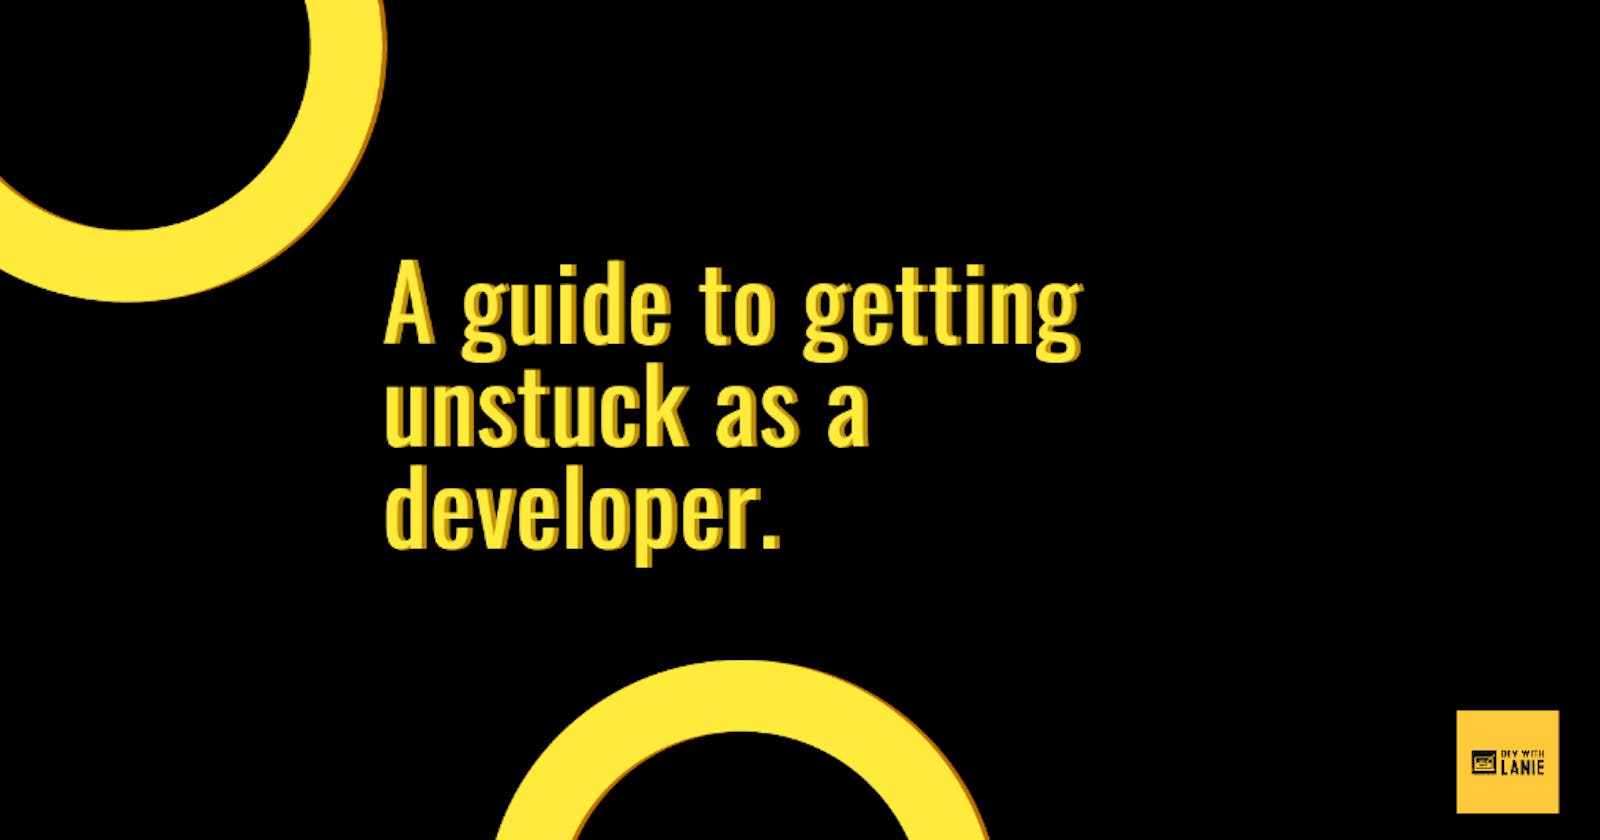 A guide to getting unstuck as a developer